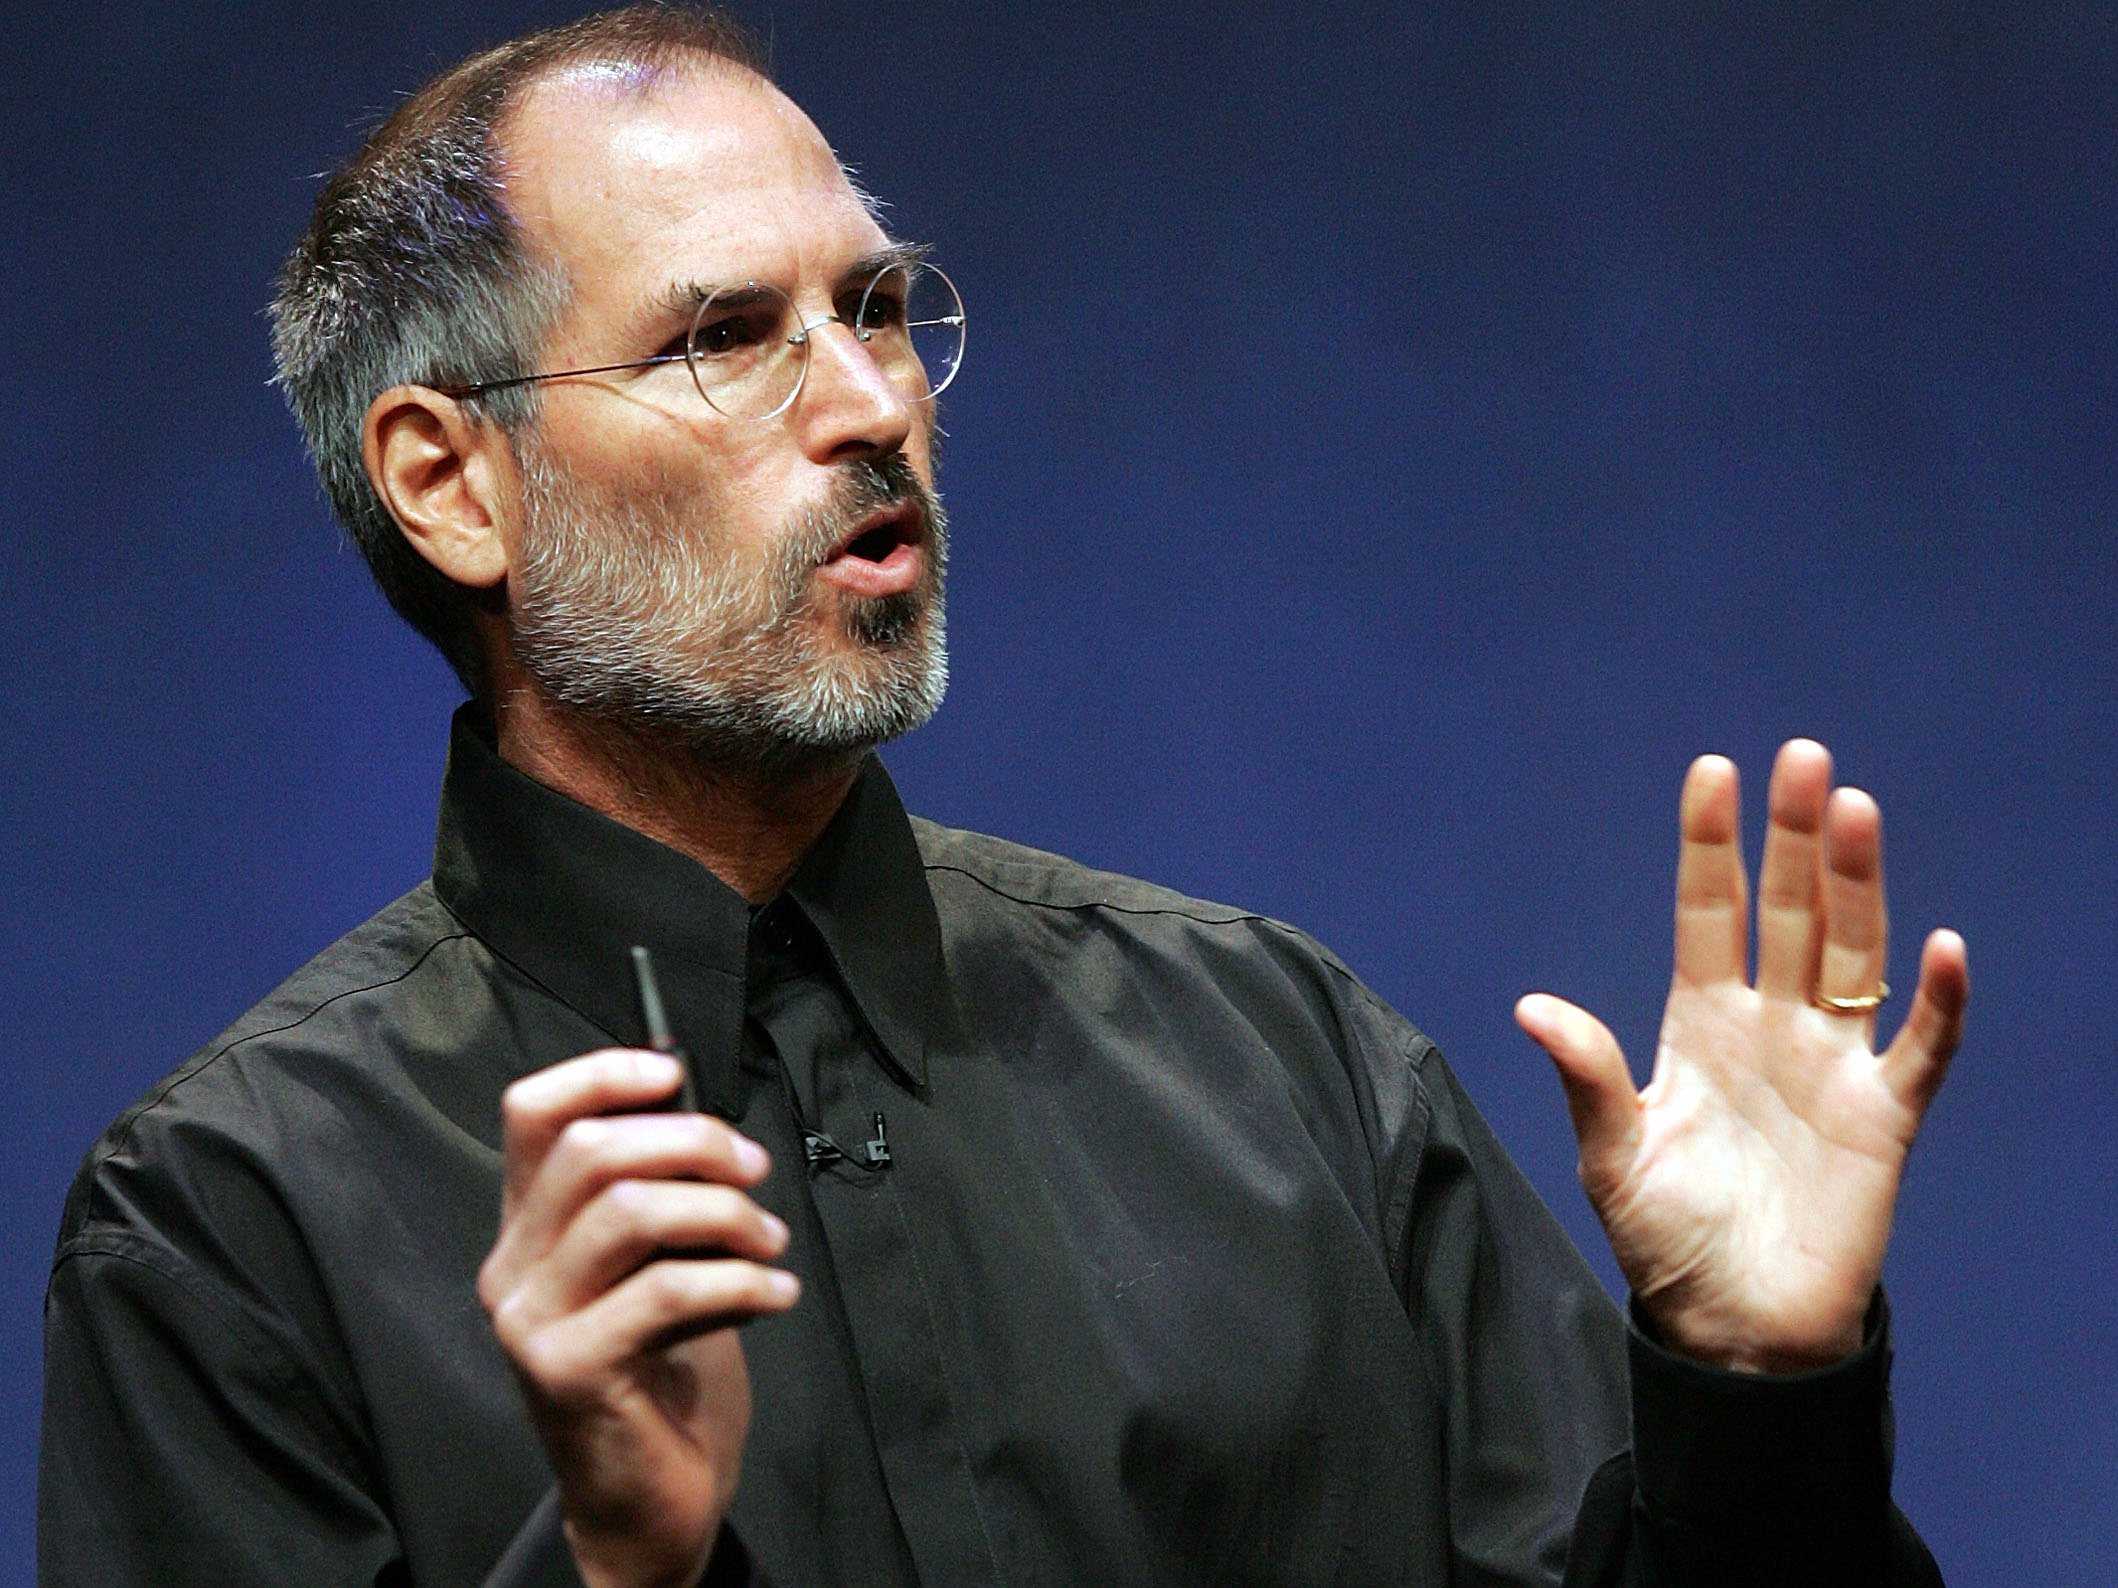 steve-jobs-went-off-on-a-rant-about-the-terrible-design-of-cars-way-back-in-2006.jpg